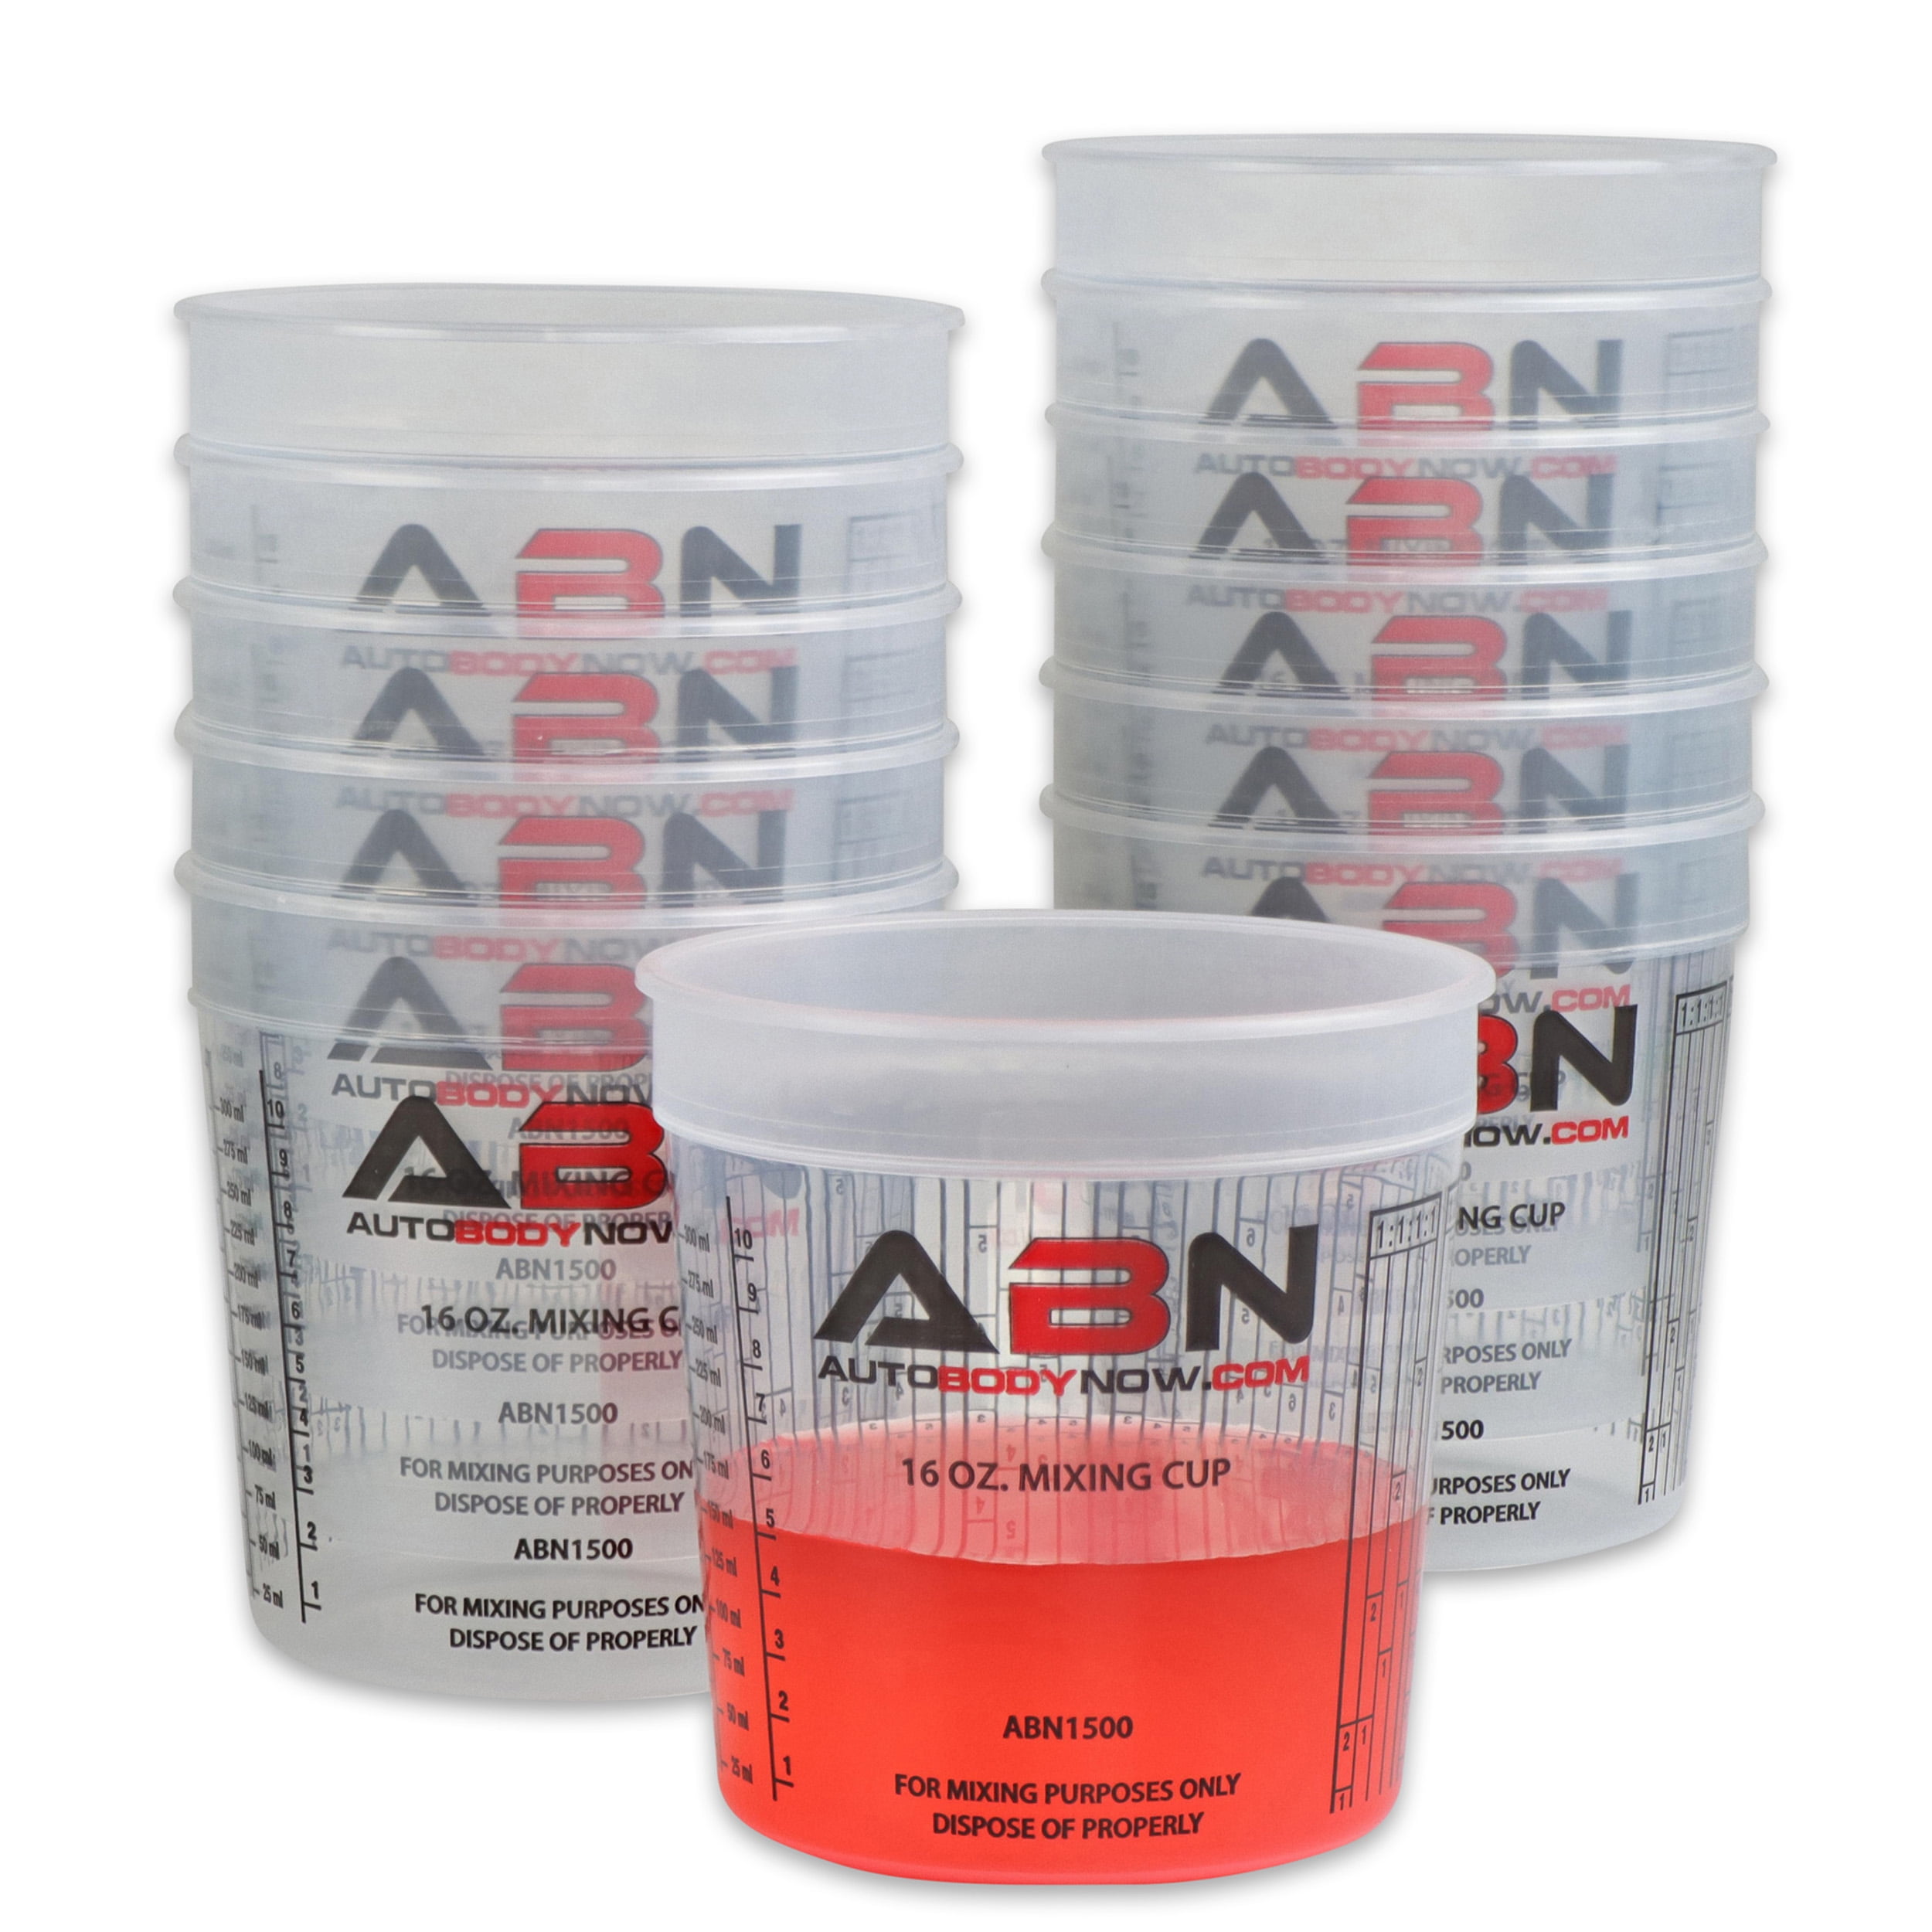 ABN Plastic Automotive Paint Mixing Cups 5pc Resin and Epoxy Mixing Pitcher  Set